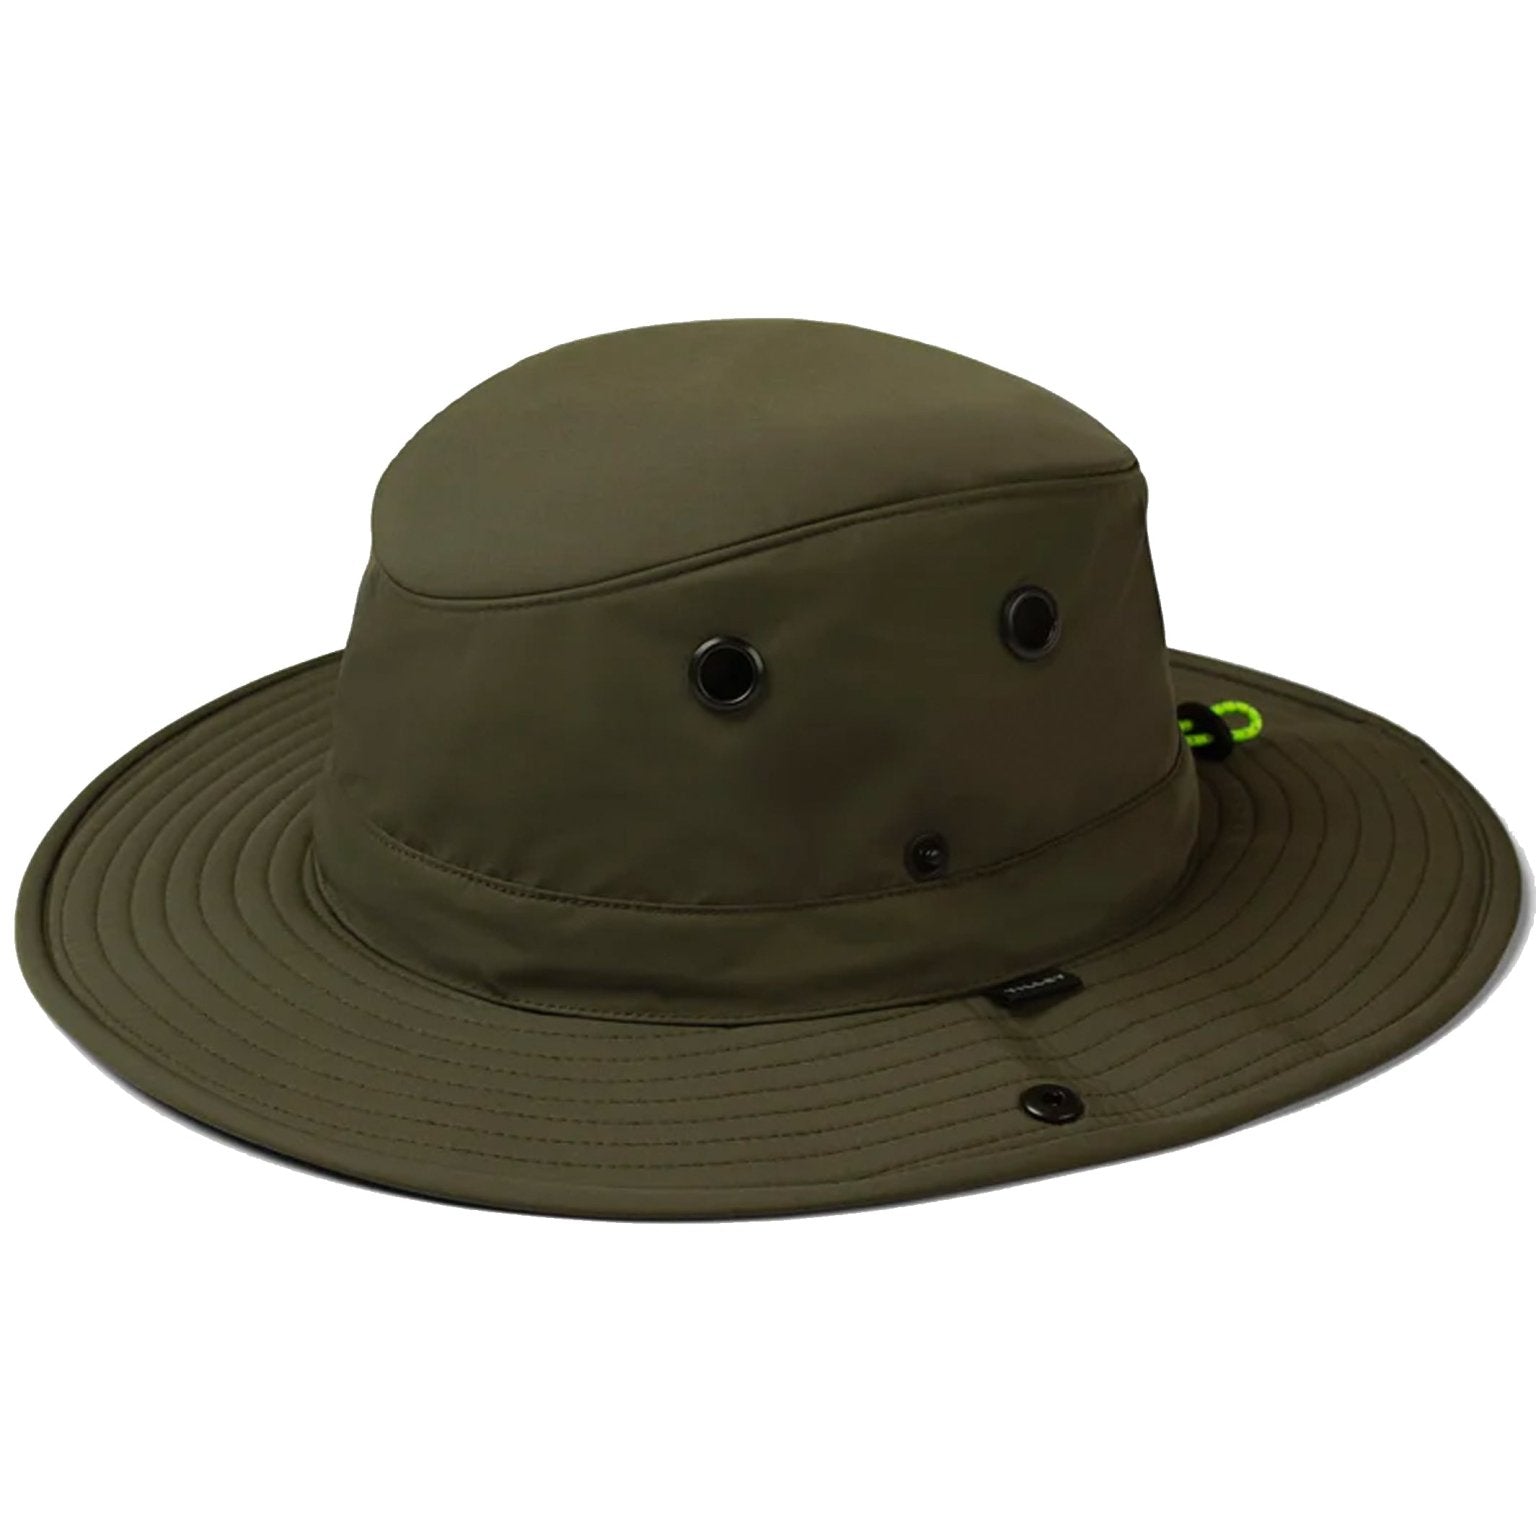 4elementsclothingTilleyTilley - TWS1 All Weather Hat - Water Repellent DWR Coated - Rated UPF 50+ and BuoyantHats826486440976